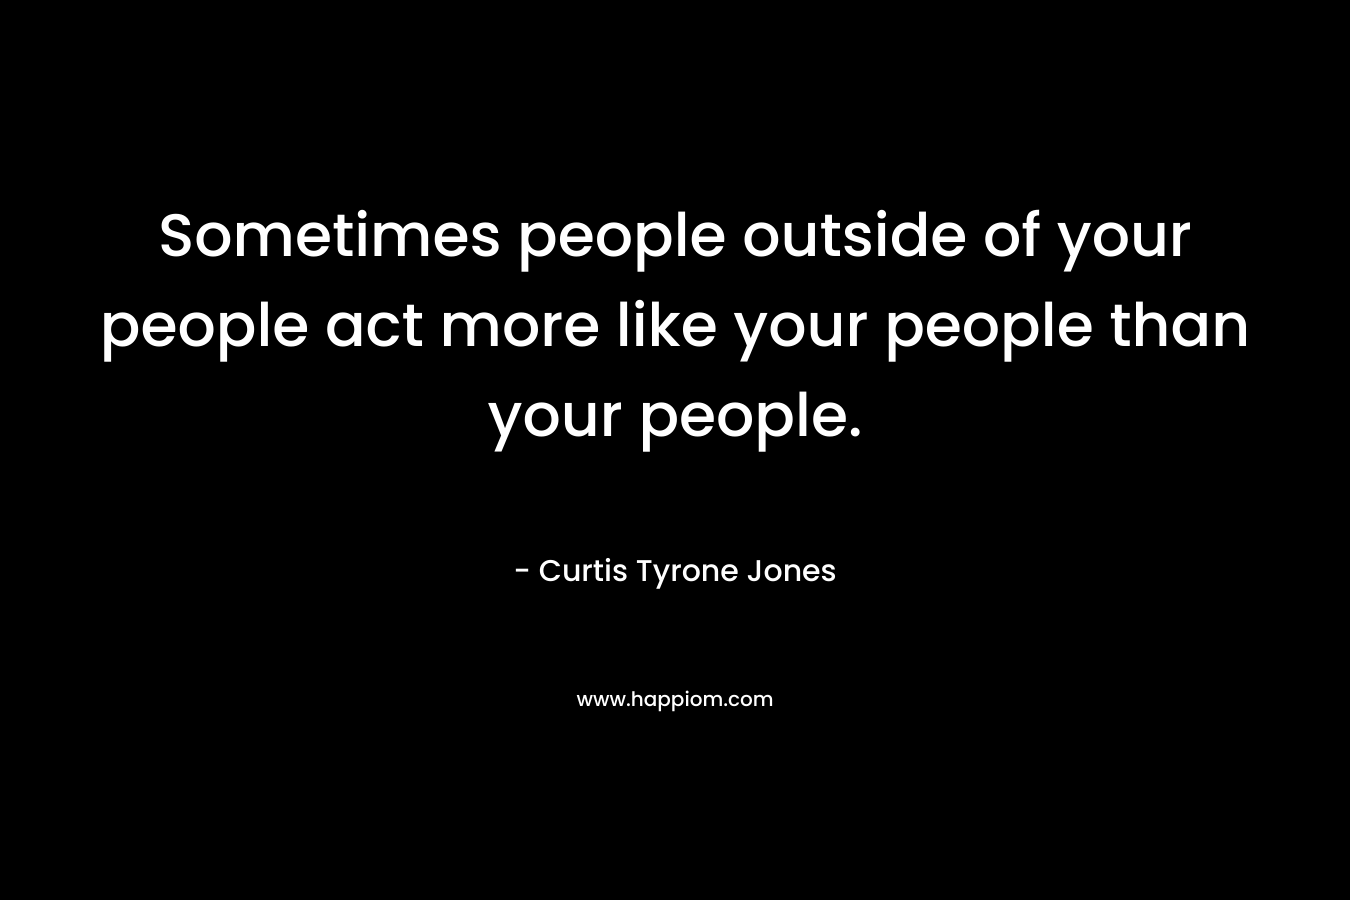 Sometimes people outside of your people act more like your people than your people.